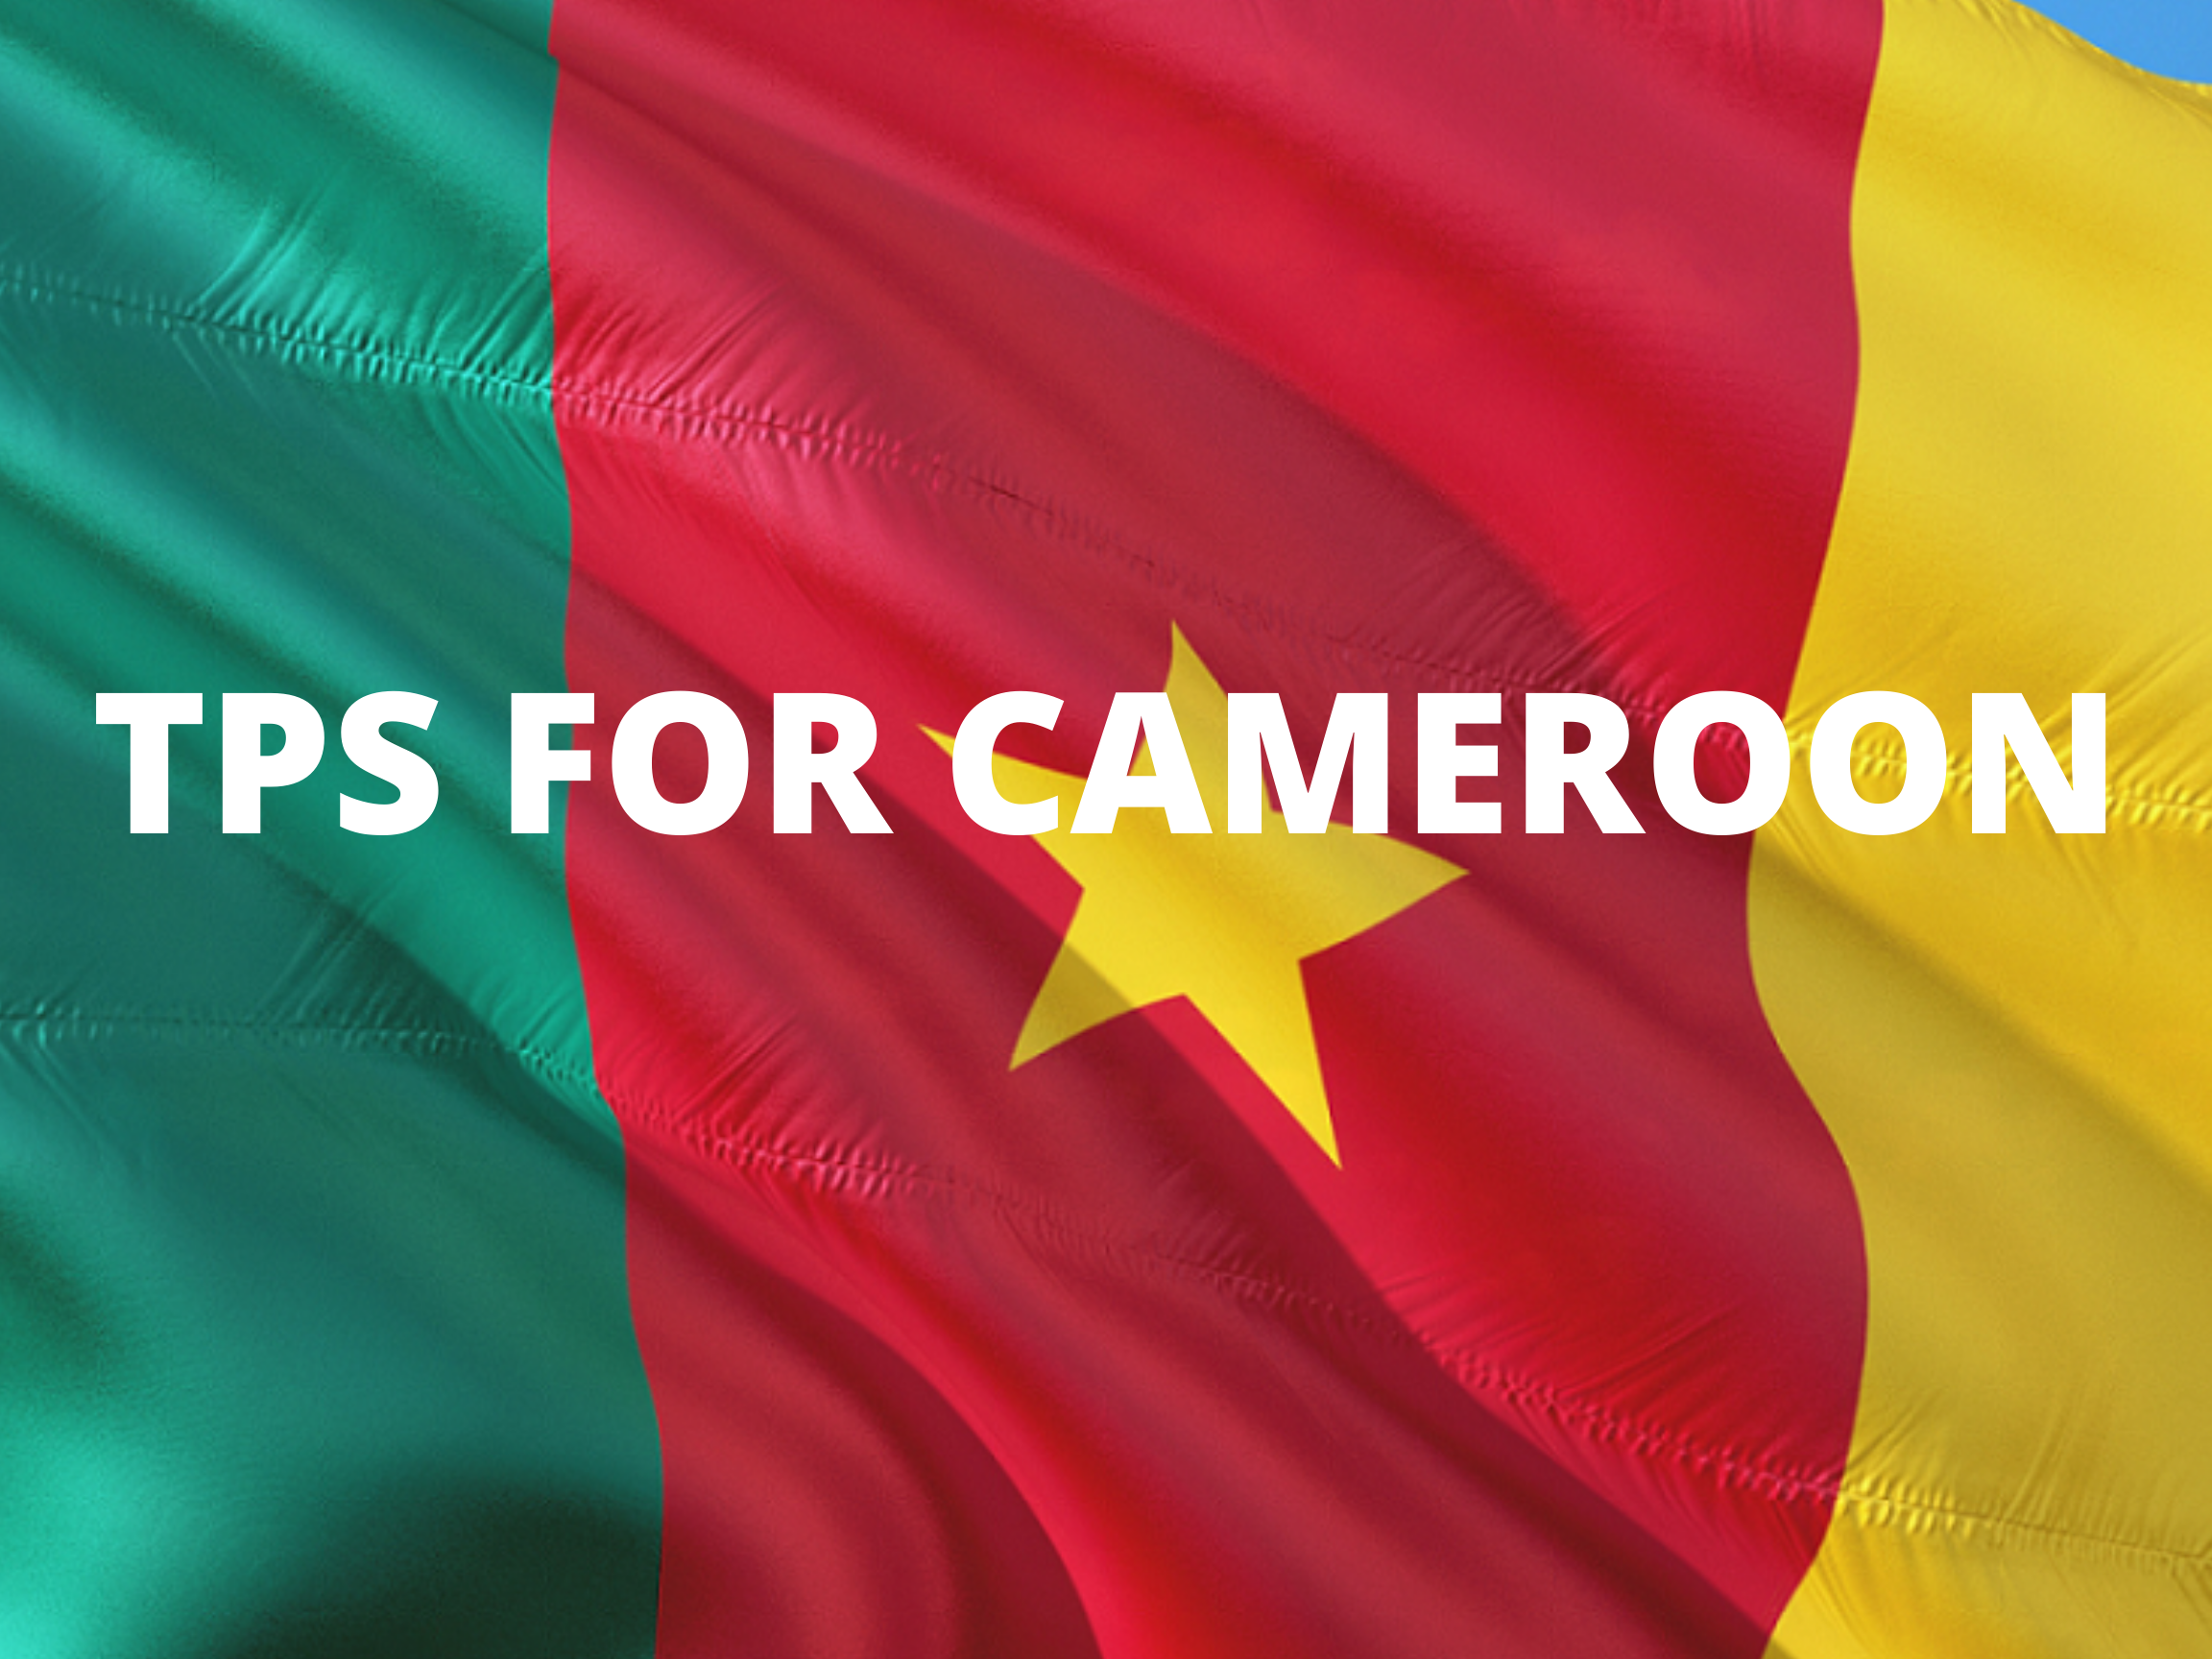 Cameroonians In The US Granted for Temporary Protected Status By Biden Administration